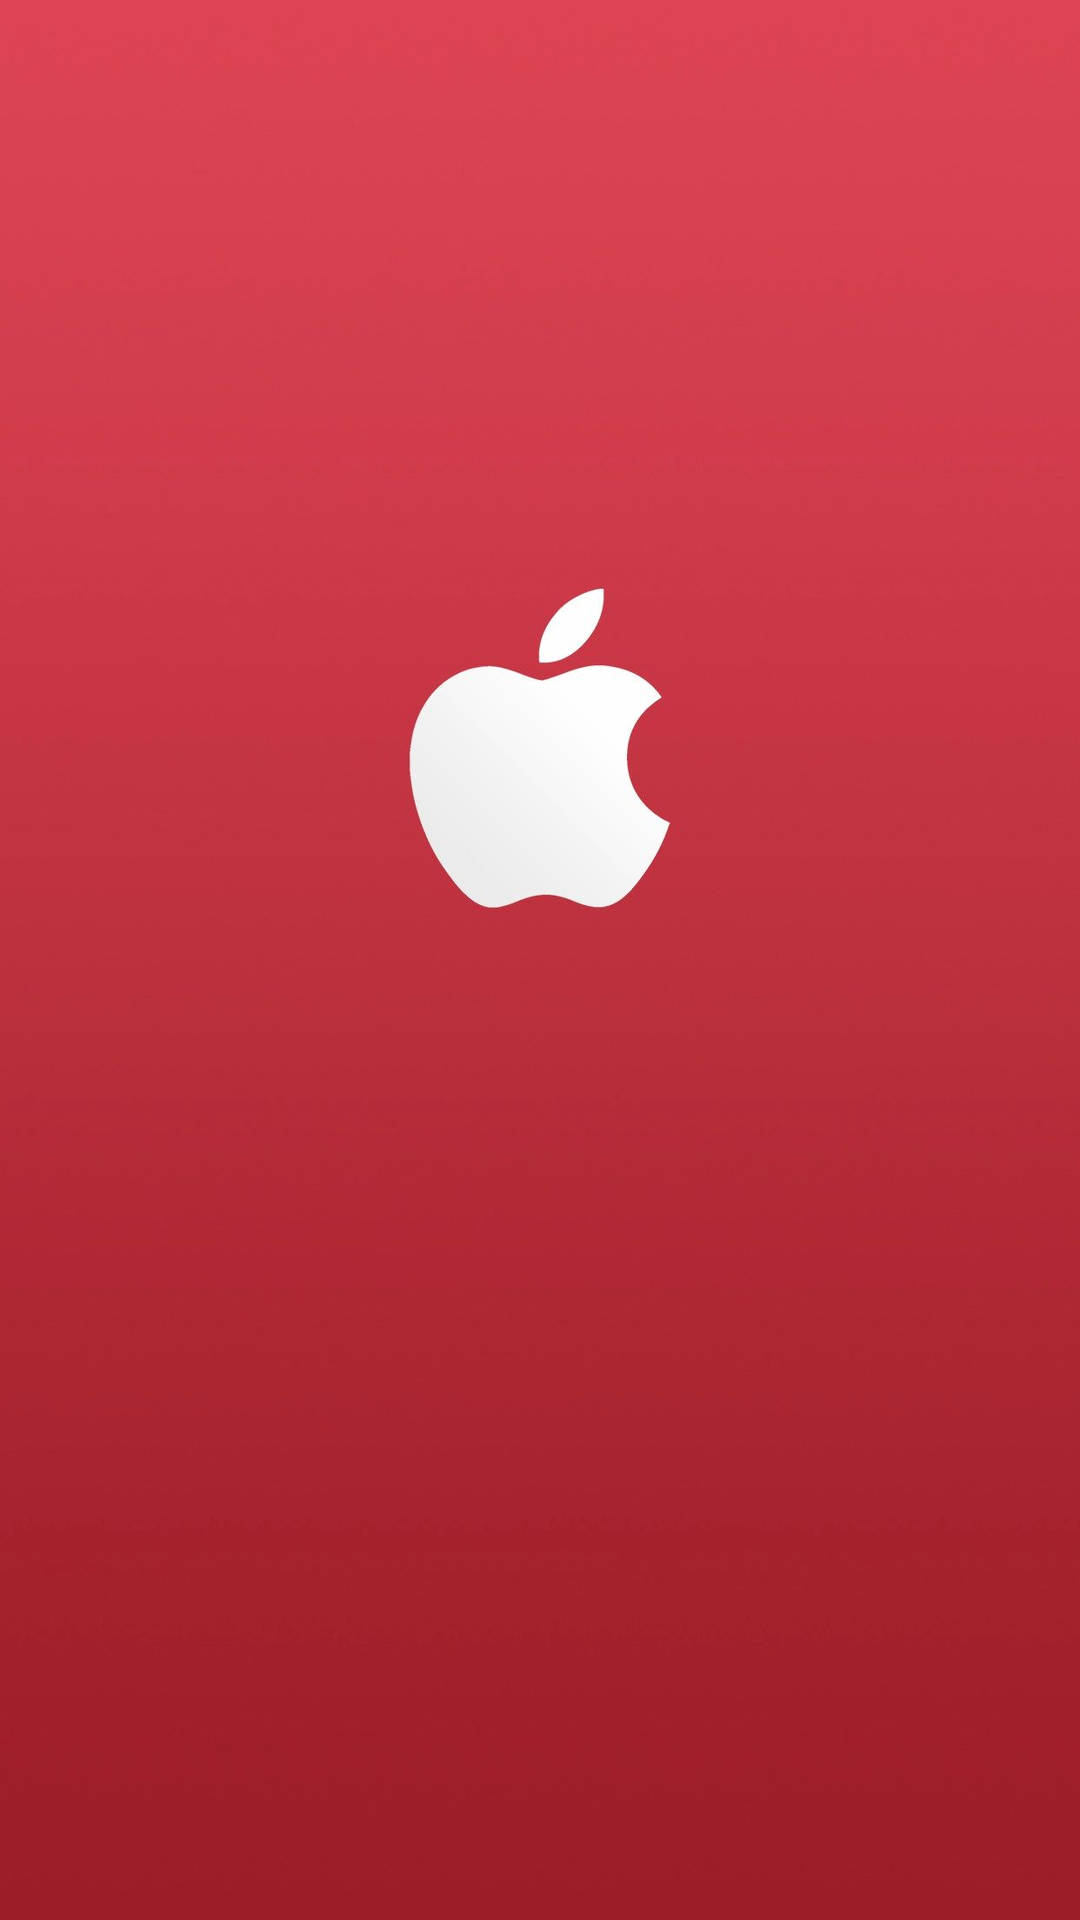 Red And White Apple Logo Iphone Background